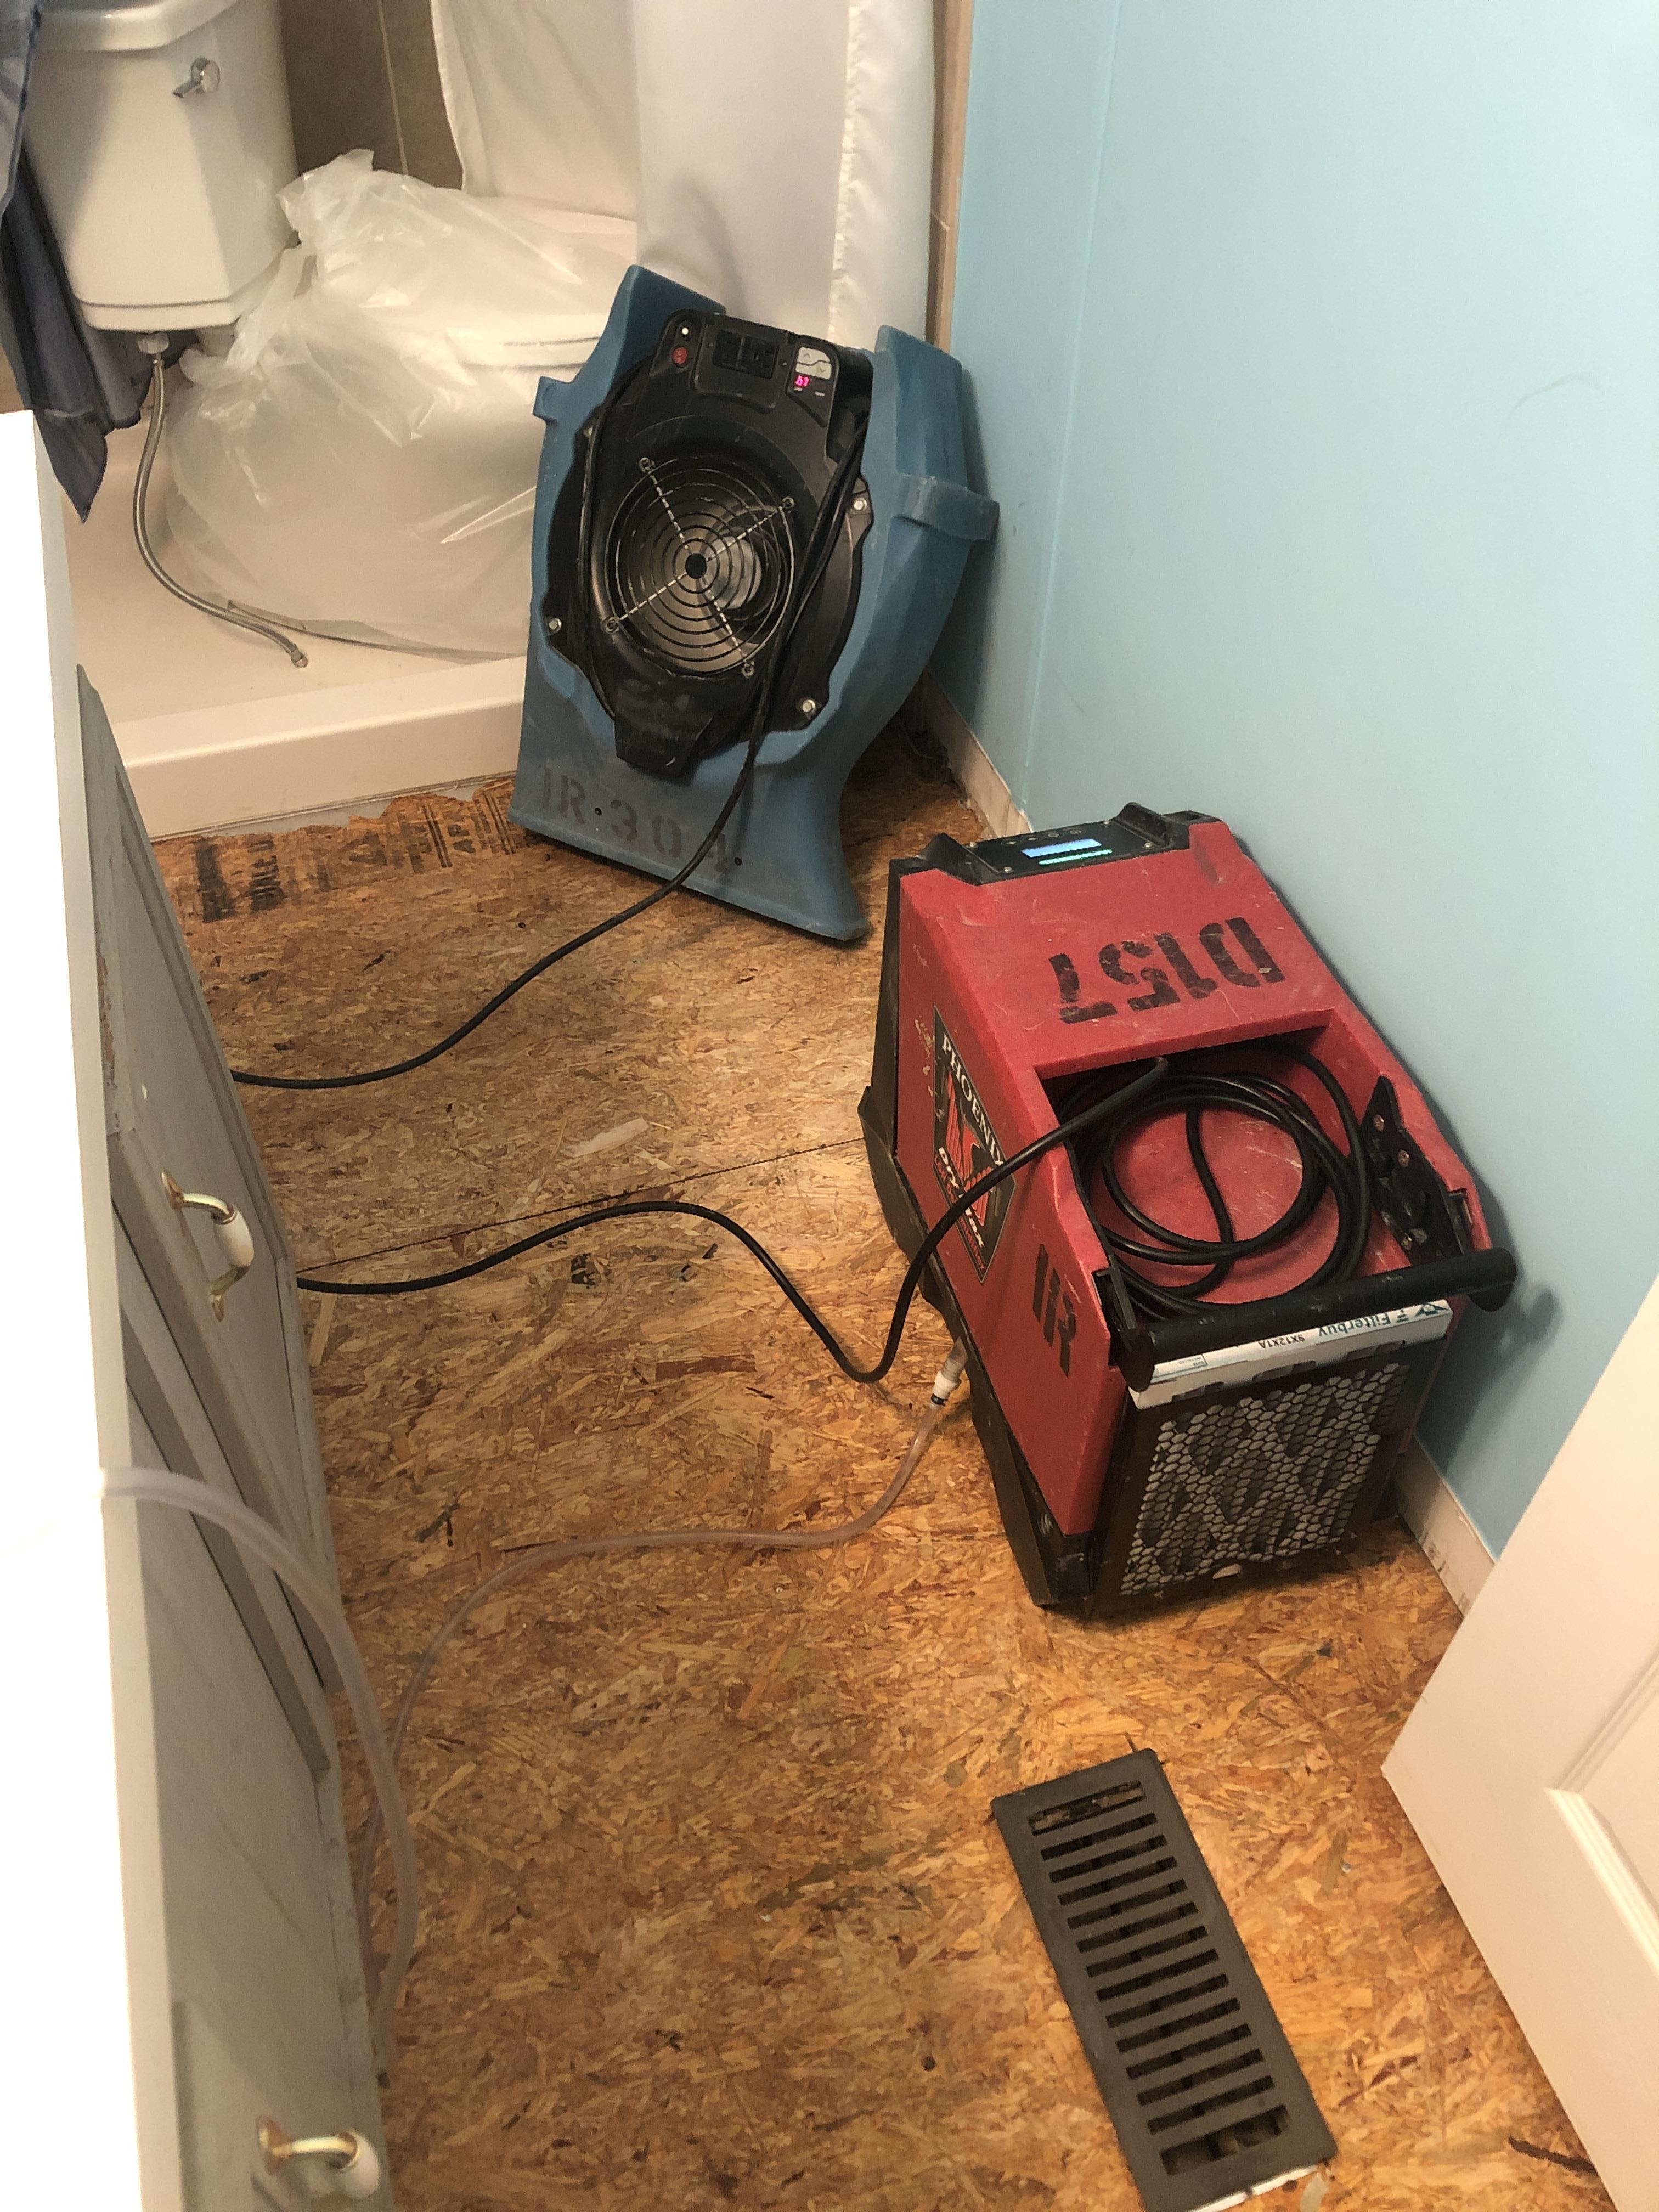 Dehumidifier and air dryer pulling the moisture out of the floor